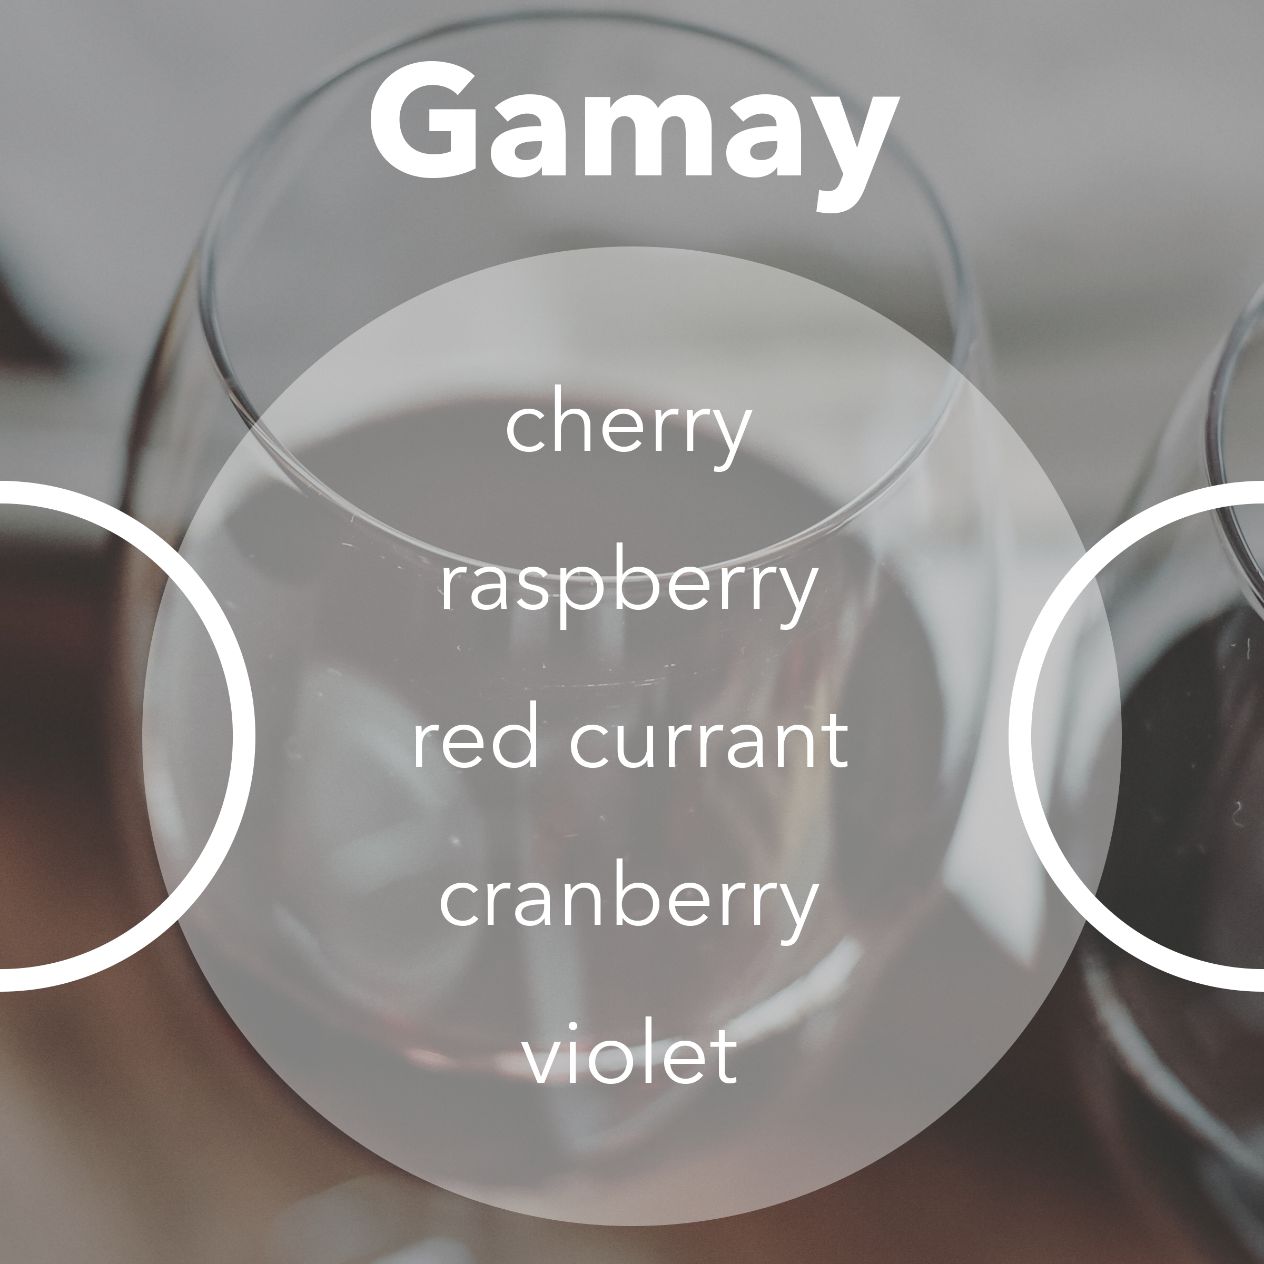 Gamay wine tasting notes.